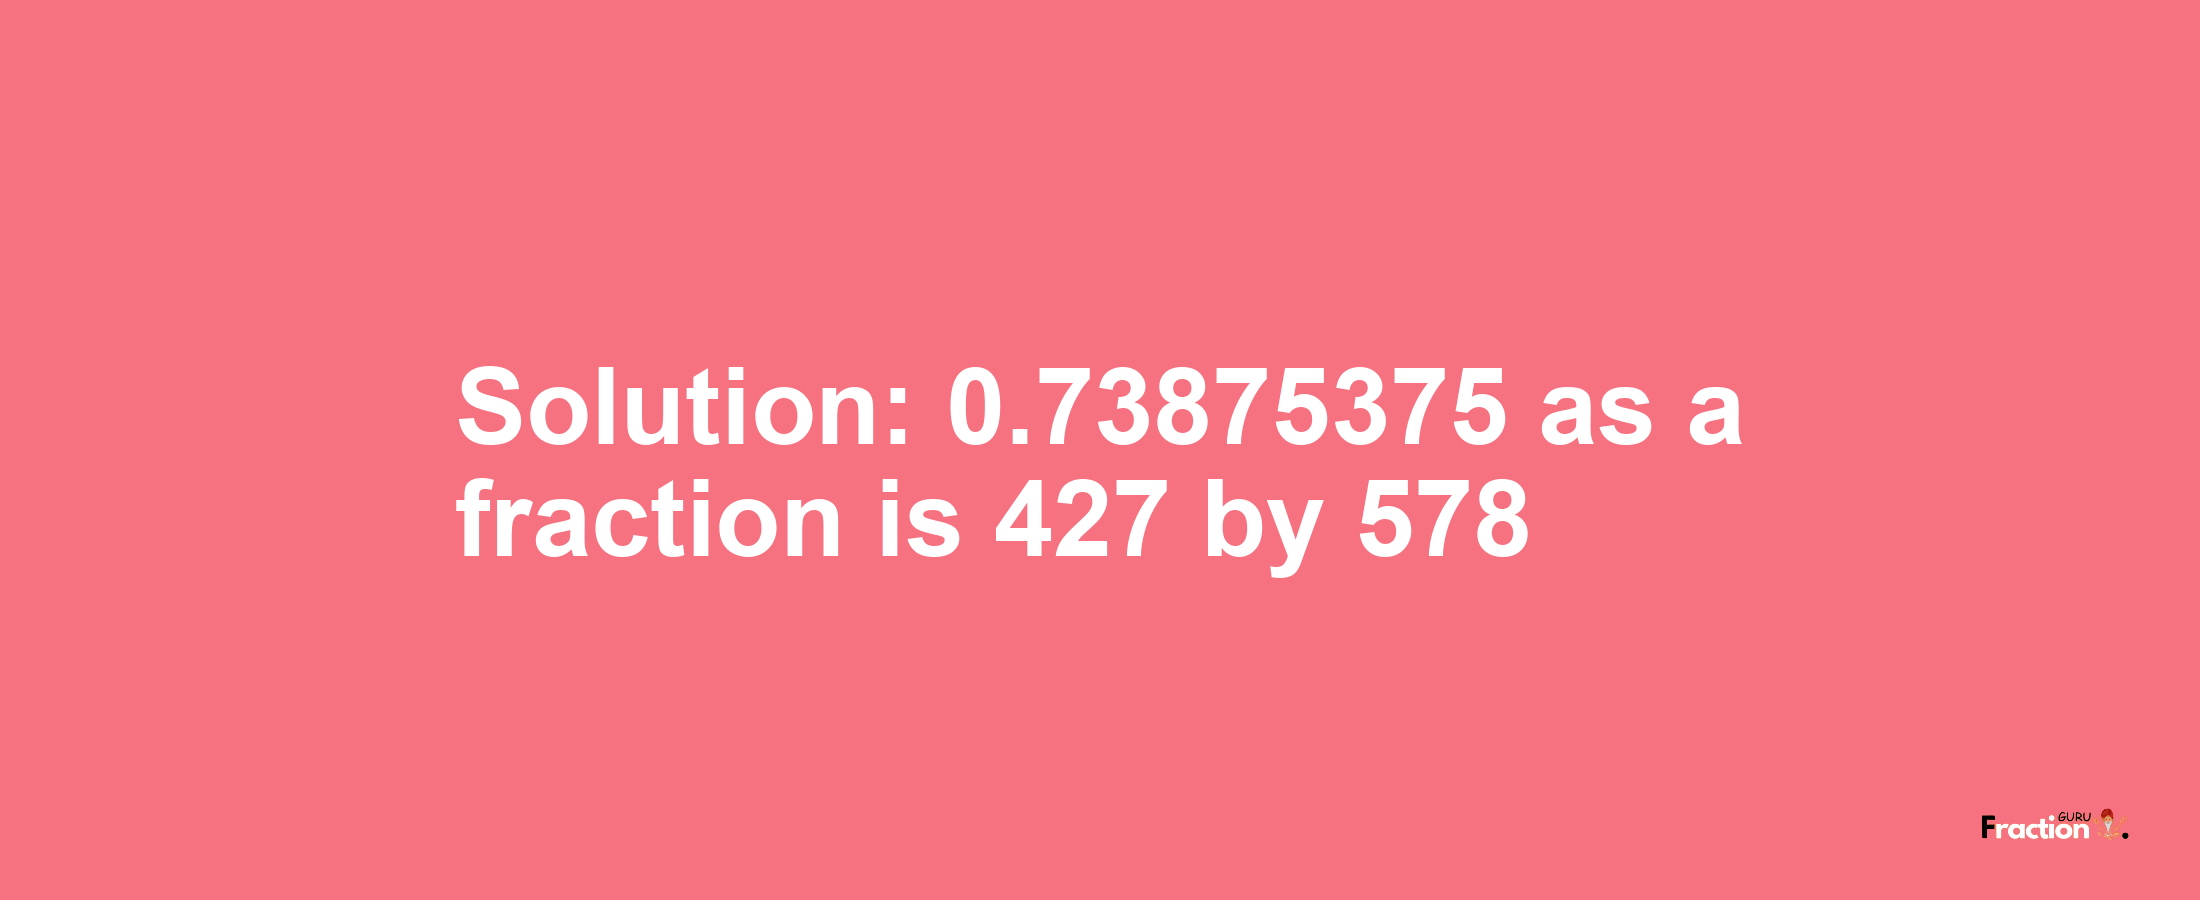 Solution:0.73875375 as a fraction is 427/578